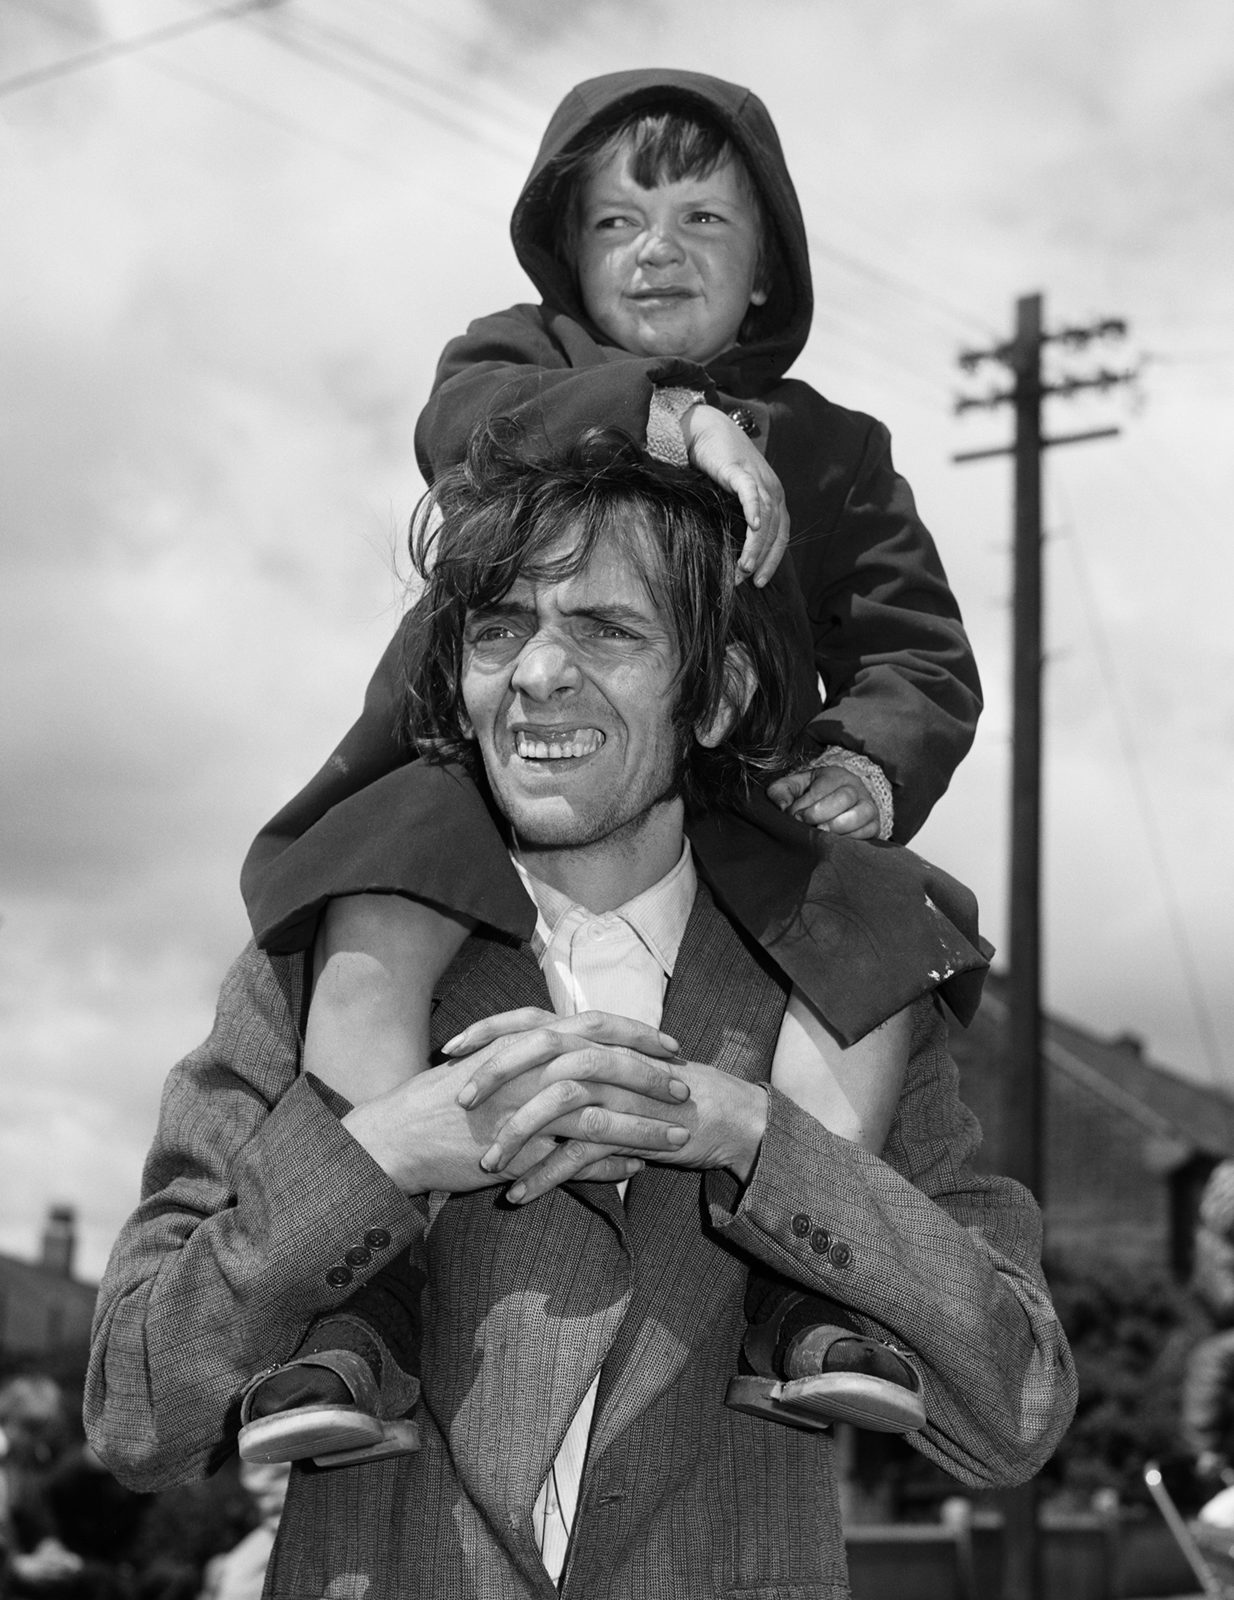 Black and white photograph of a father carrying his son on his shoulders, which appears in the new Chris Killip exhibition